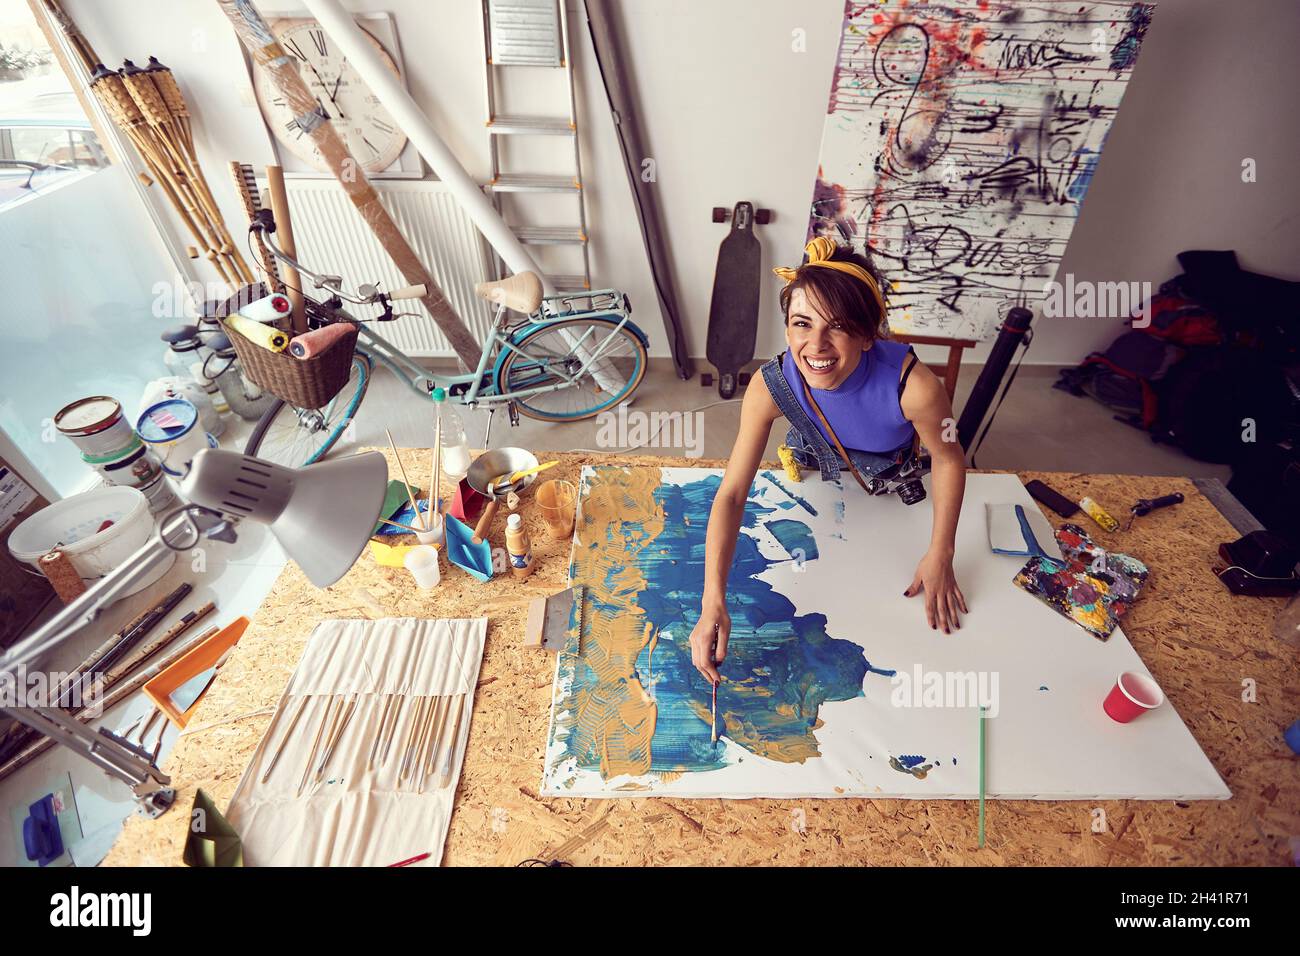 Woman painter at workspace.Smiling artist working on new paint Stock Photo